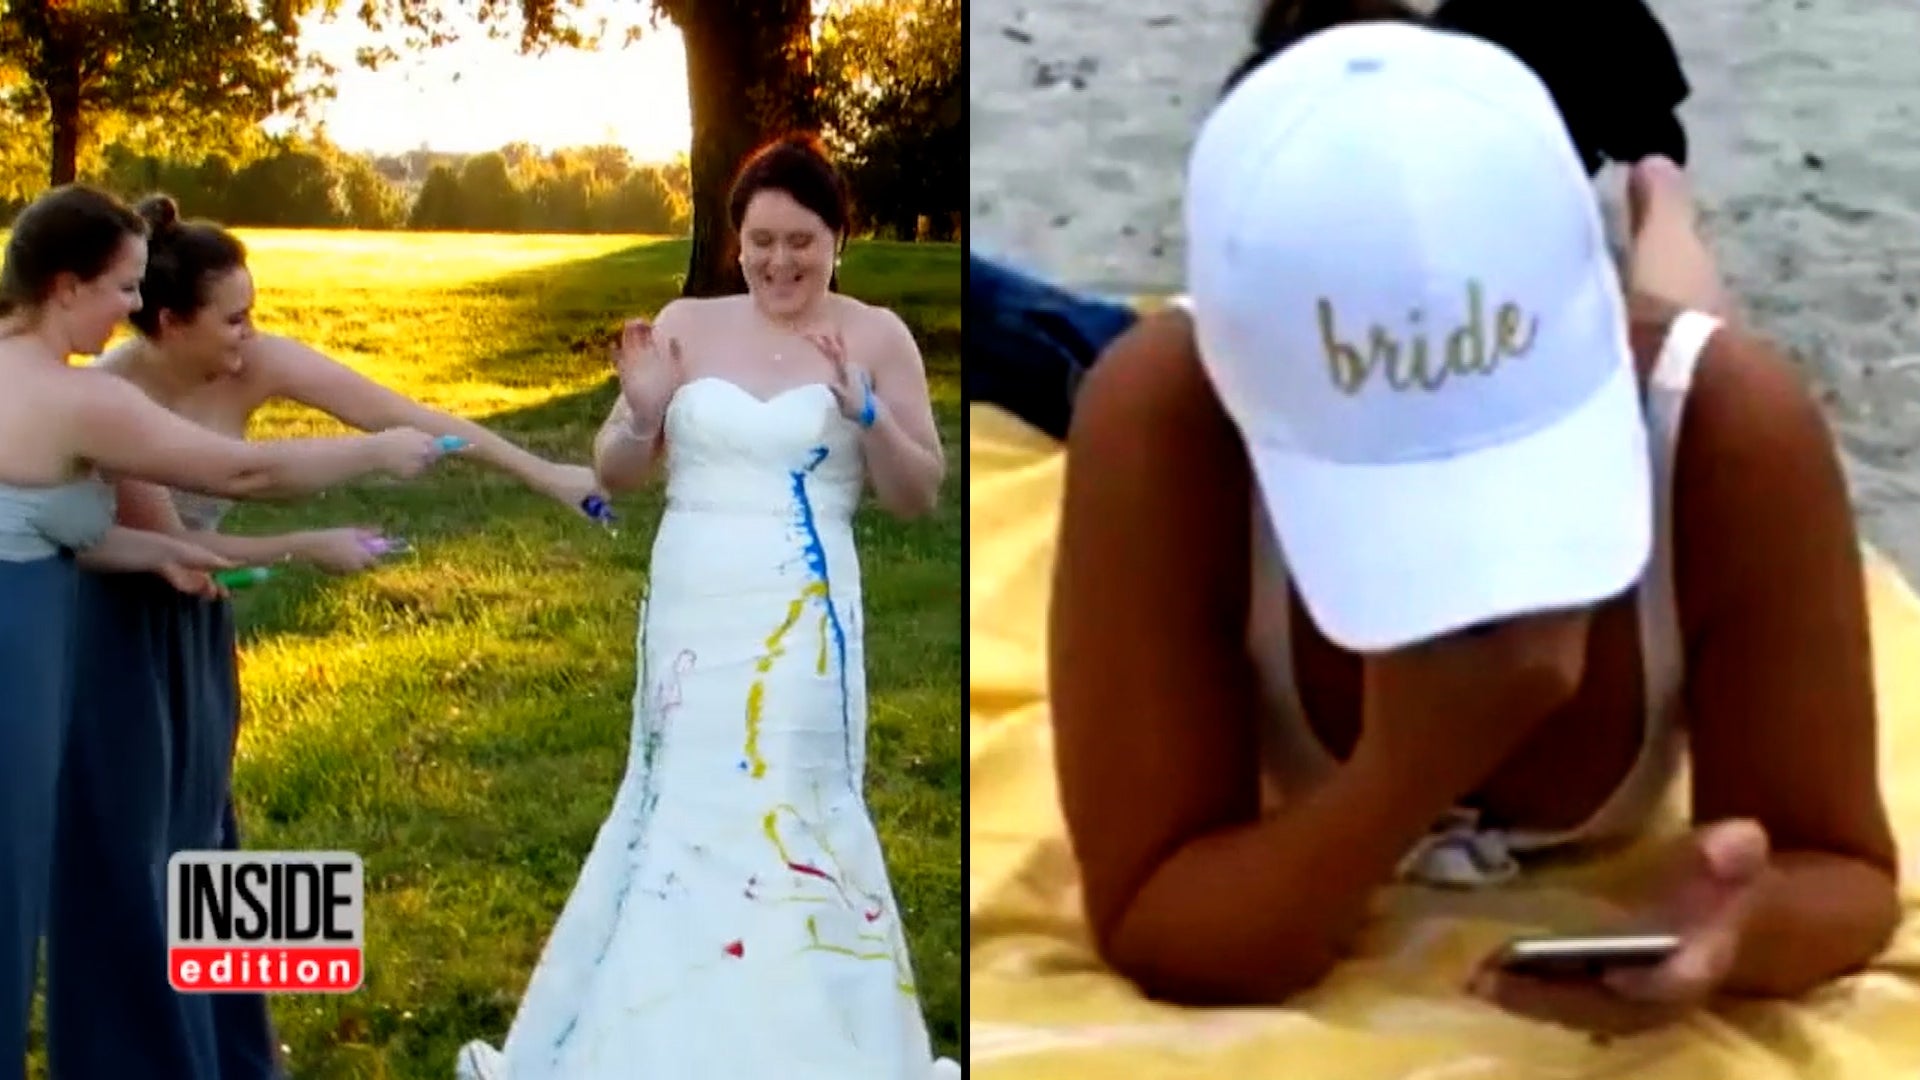 woman in a wedding dress getting paint splattered on her by 2 bridesmaids / woman on the beach in a 'Bride' hat looking at her phone upset